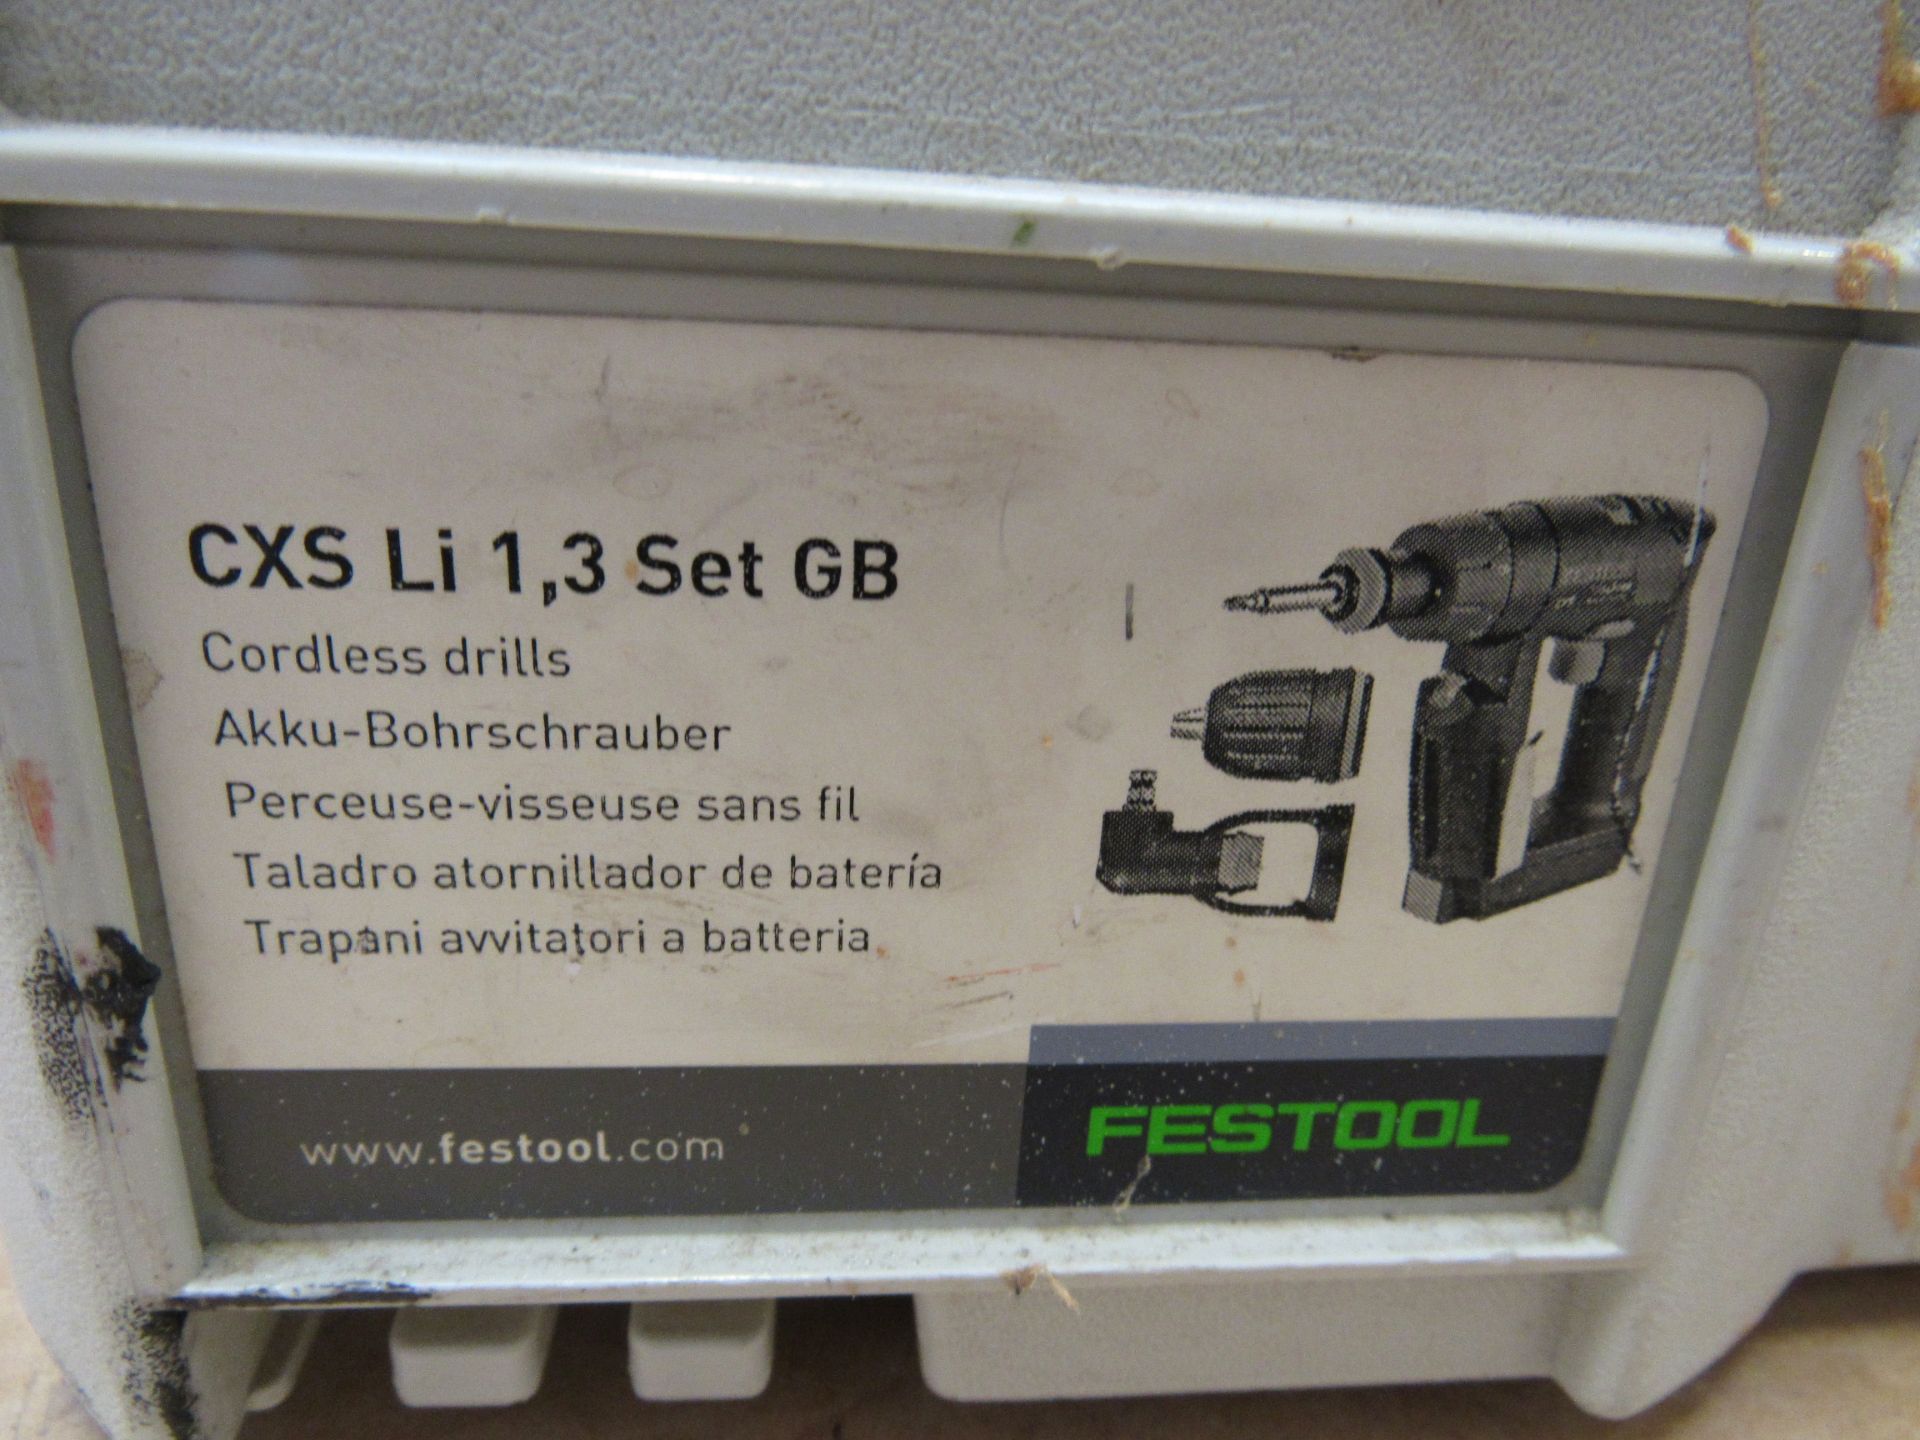 Festool CXSU Li 1.3 GB Drill Driver, 2 batteries, charger and case - Image 3 of 4